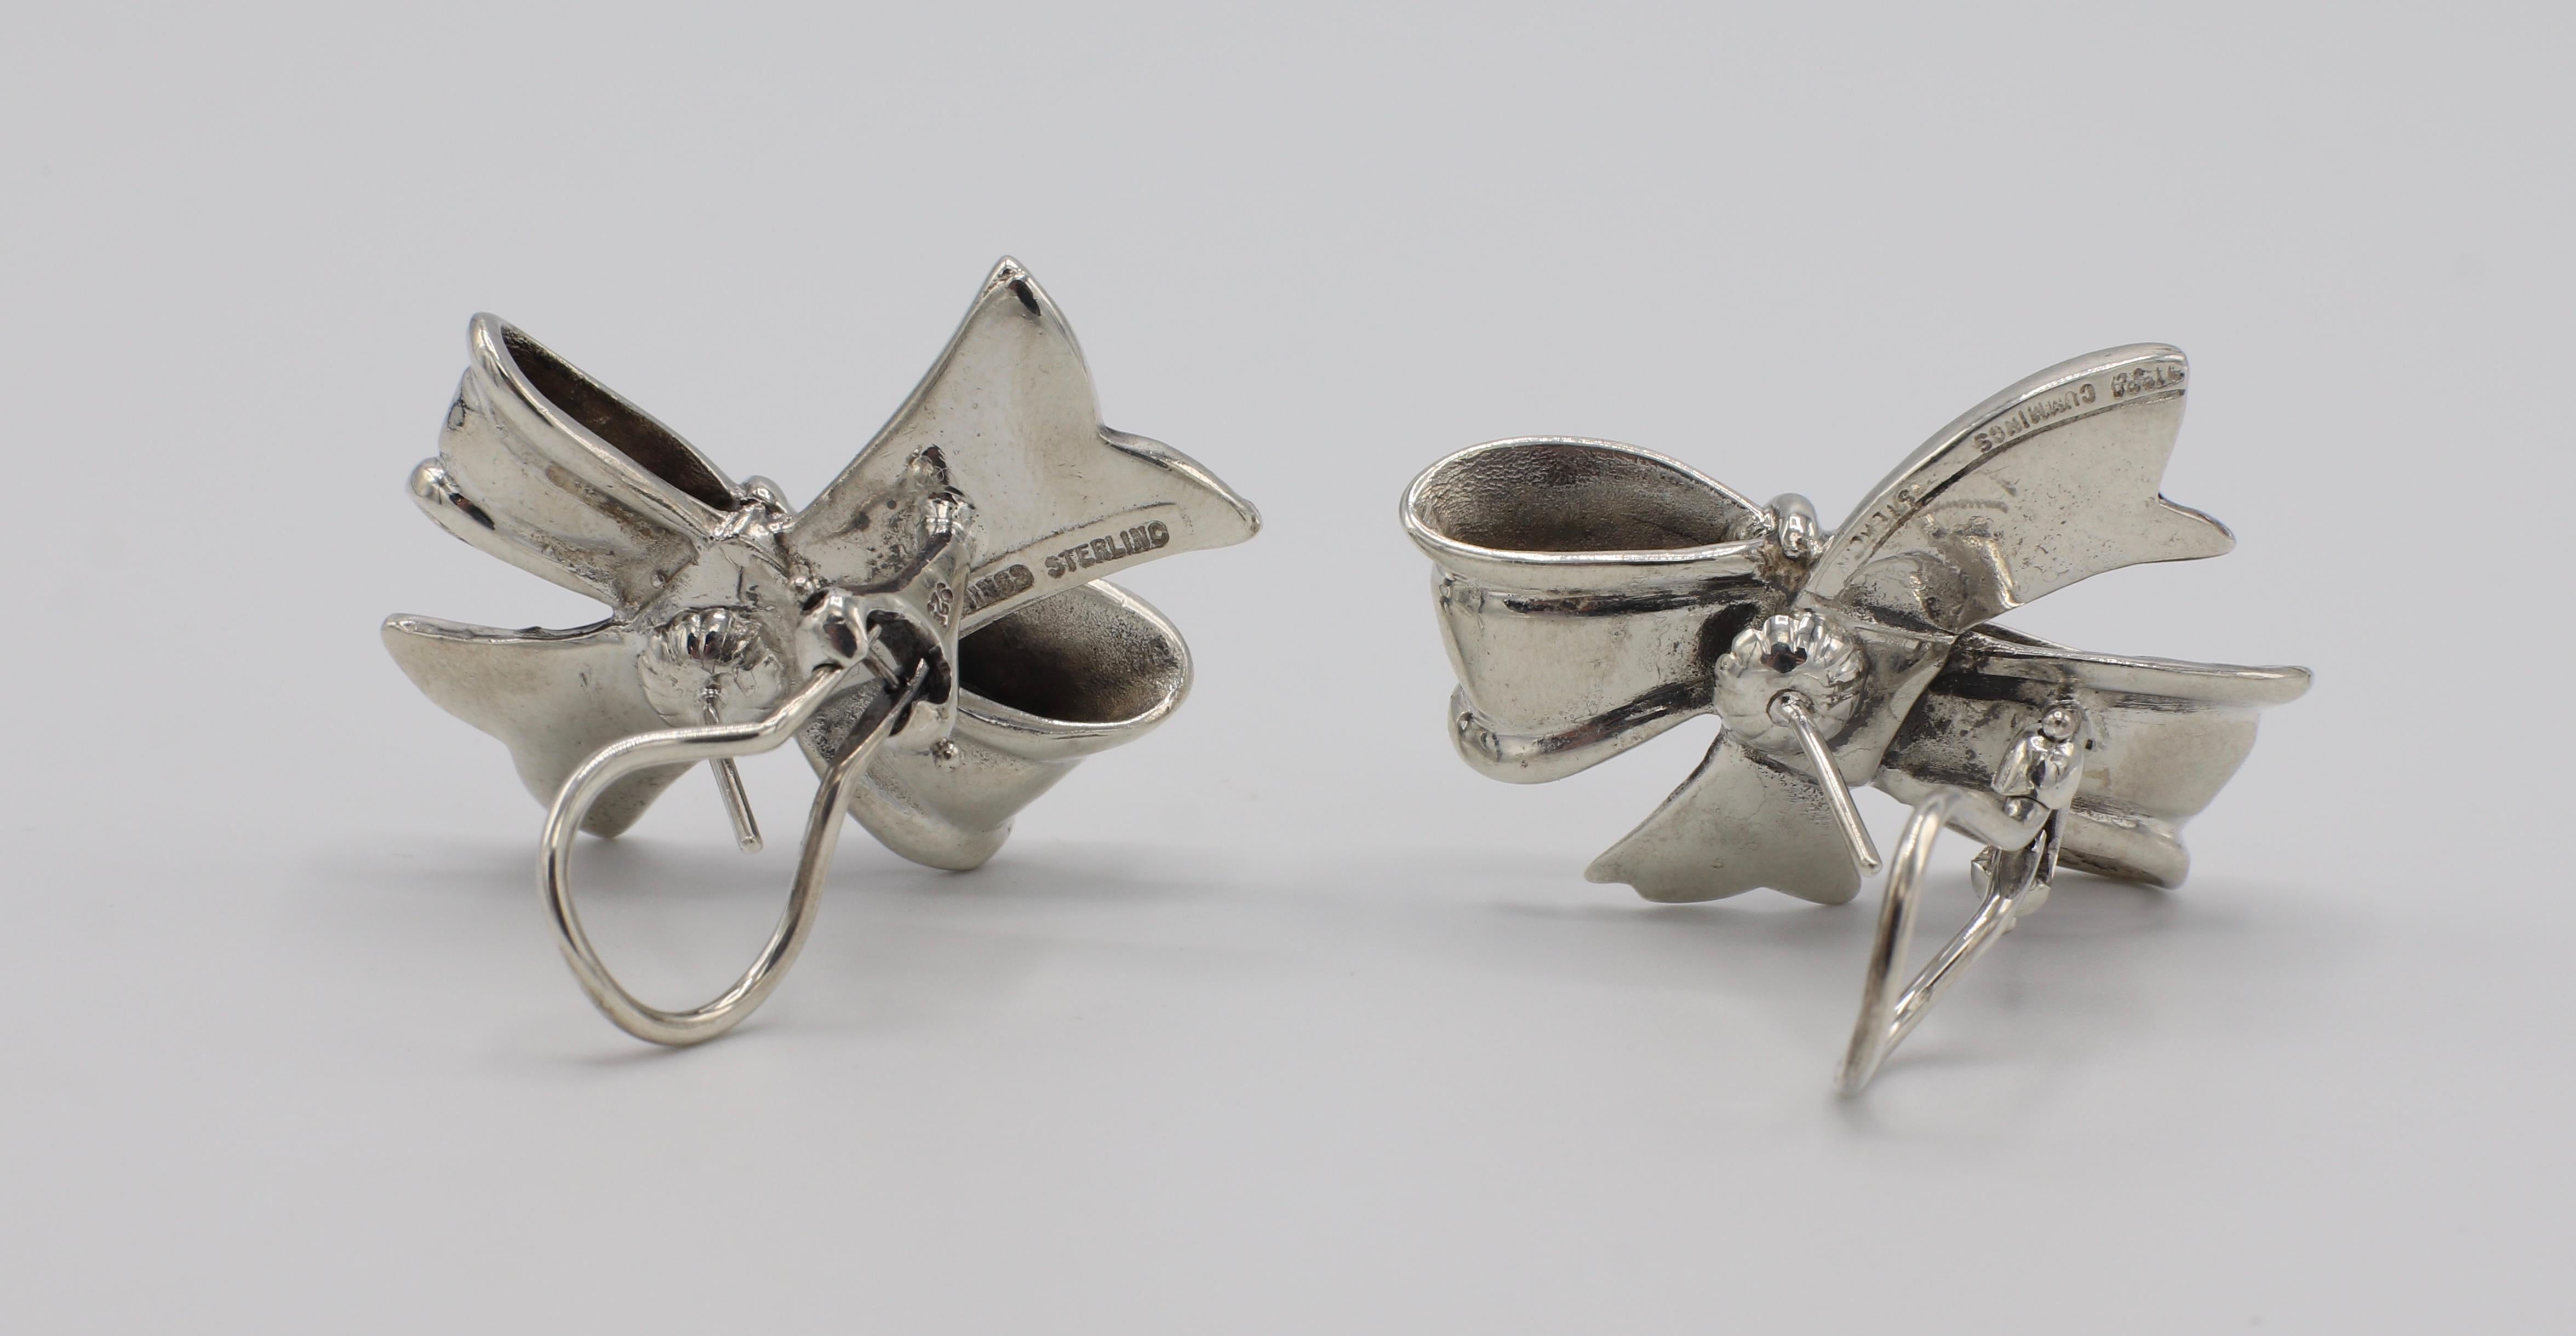 Vintage 1984 Angela Cummings Sterling Silver Bow Earrings 

Metal: Sterling Silver 925
Weight: 17.51 grams
Width: Approx. 30mm 
Length: Approx. 22.6 mm
Backs: Lever backs with posts 
Signed: 